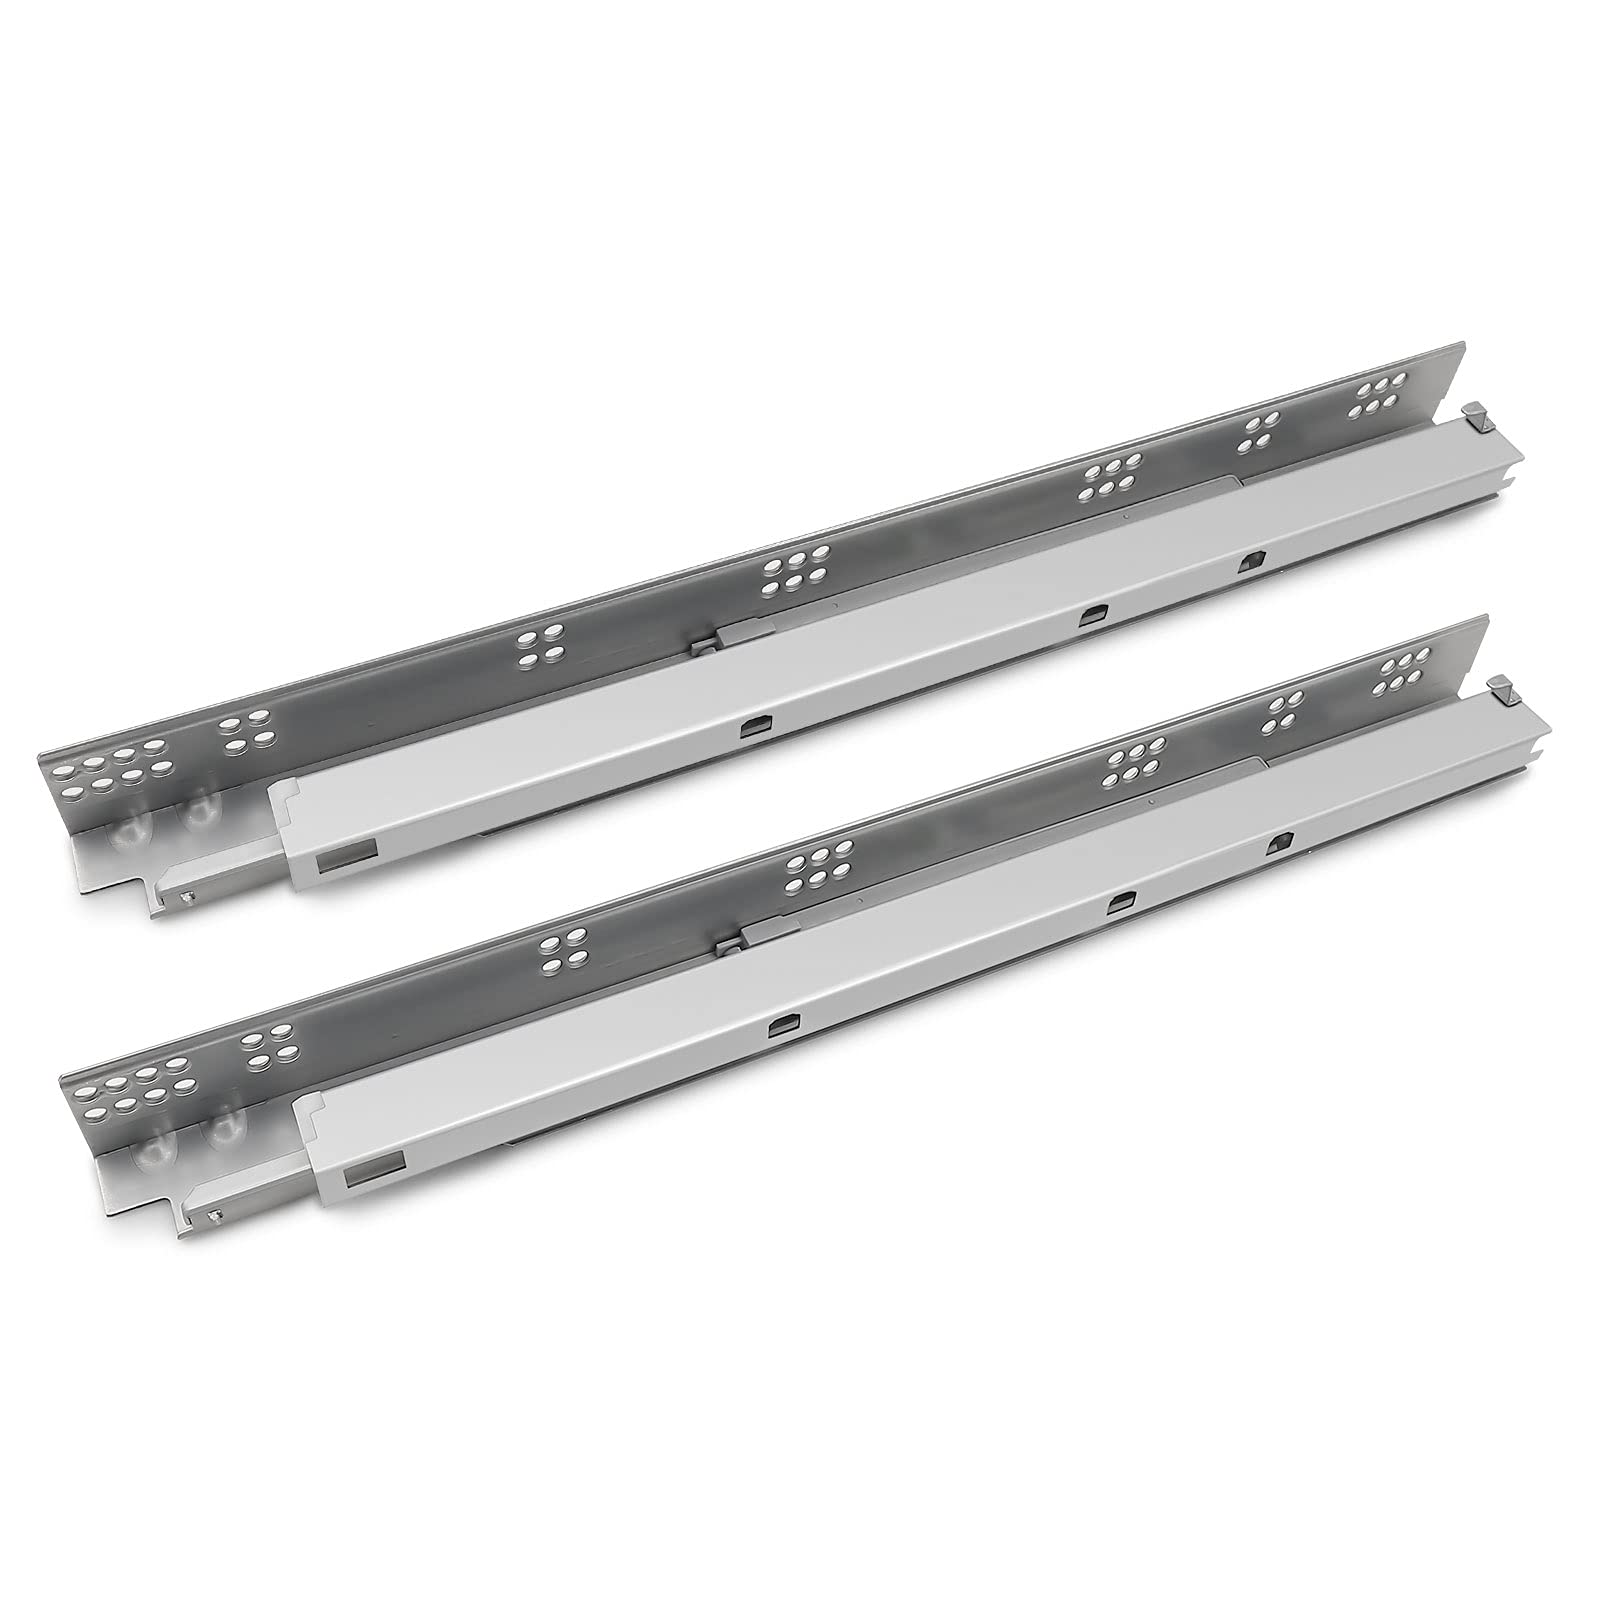 Gobrico Soft Close Under Mounted Drawer Slides 21 inch, Heavy Duty Concealed Drawer Slide Glides Runners Full Extension, with Locking Device Rear Mounting Brackets, 1Pair